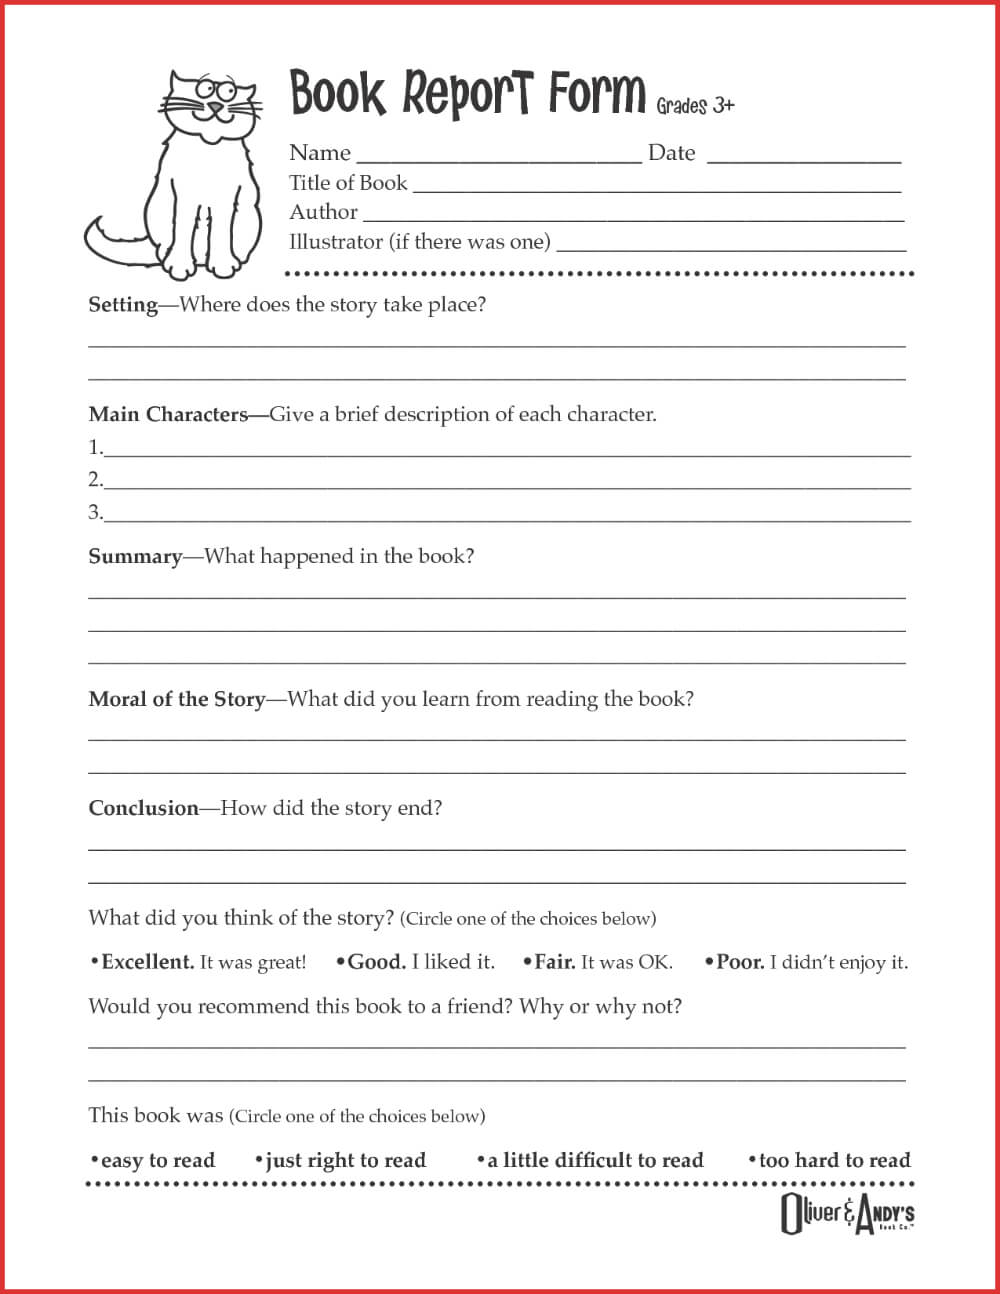 Second Grade Book Report Template Book Report Form Grades 3 Pertaining To Story Report Template